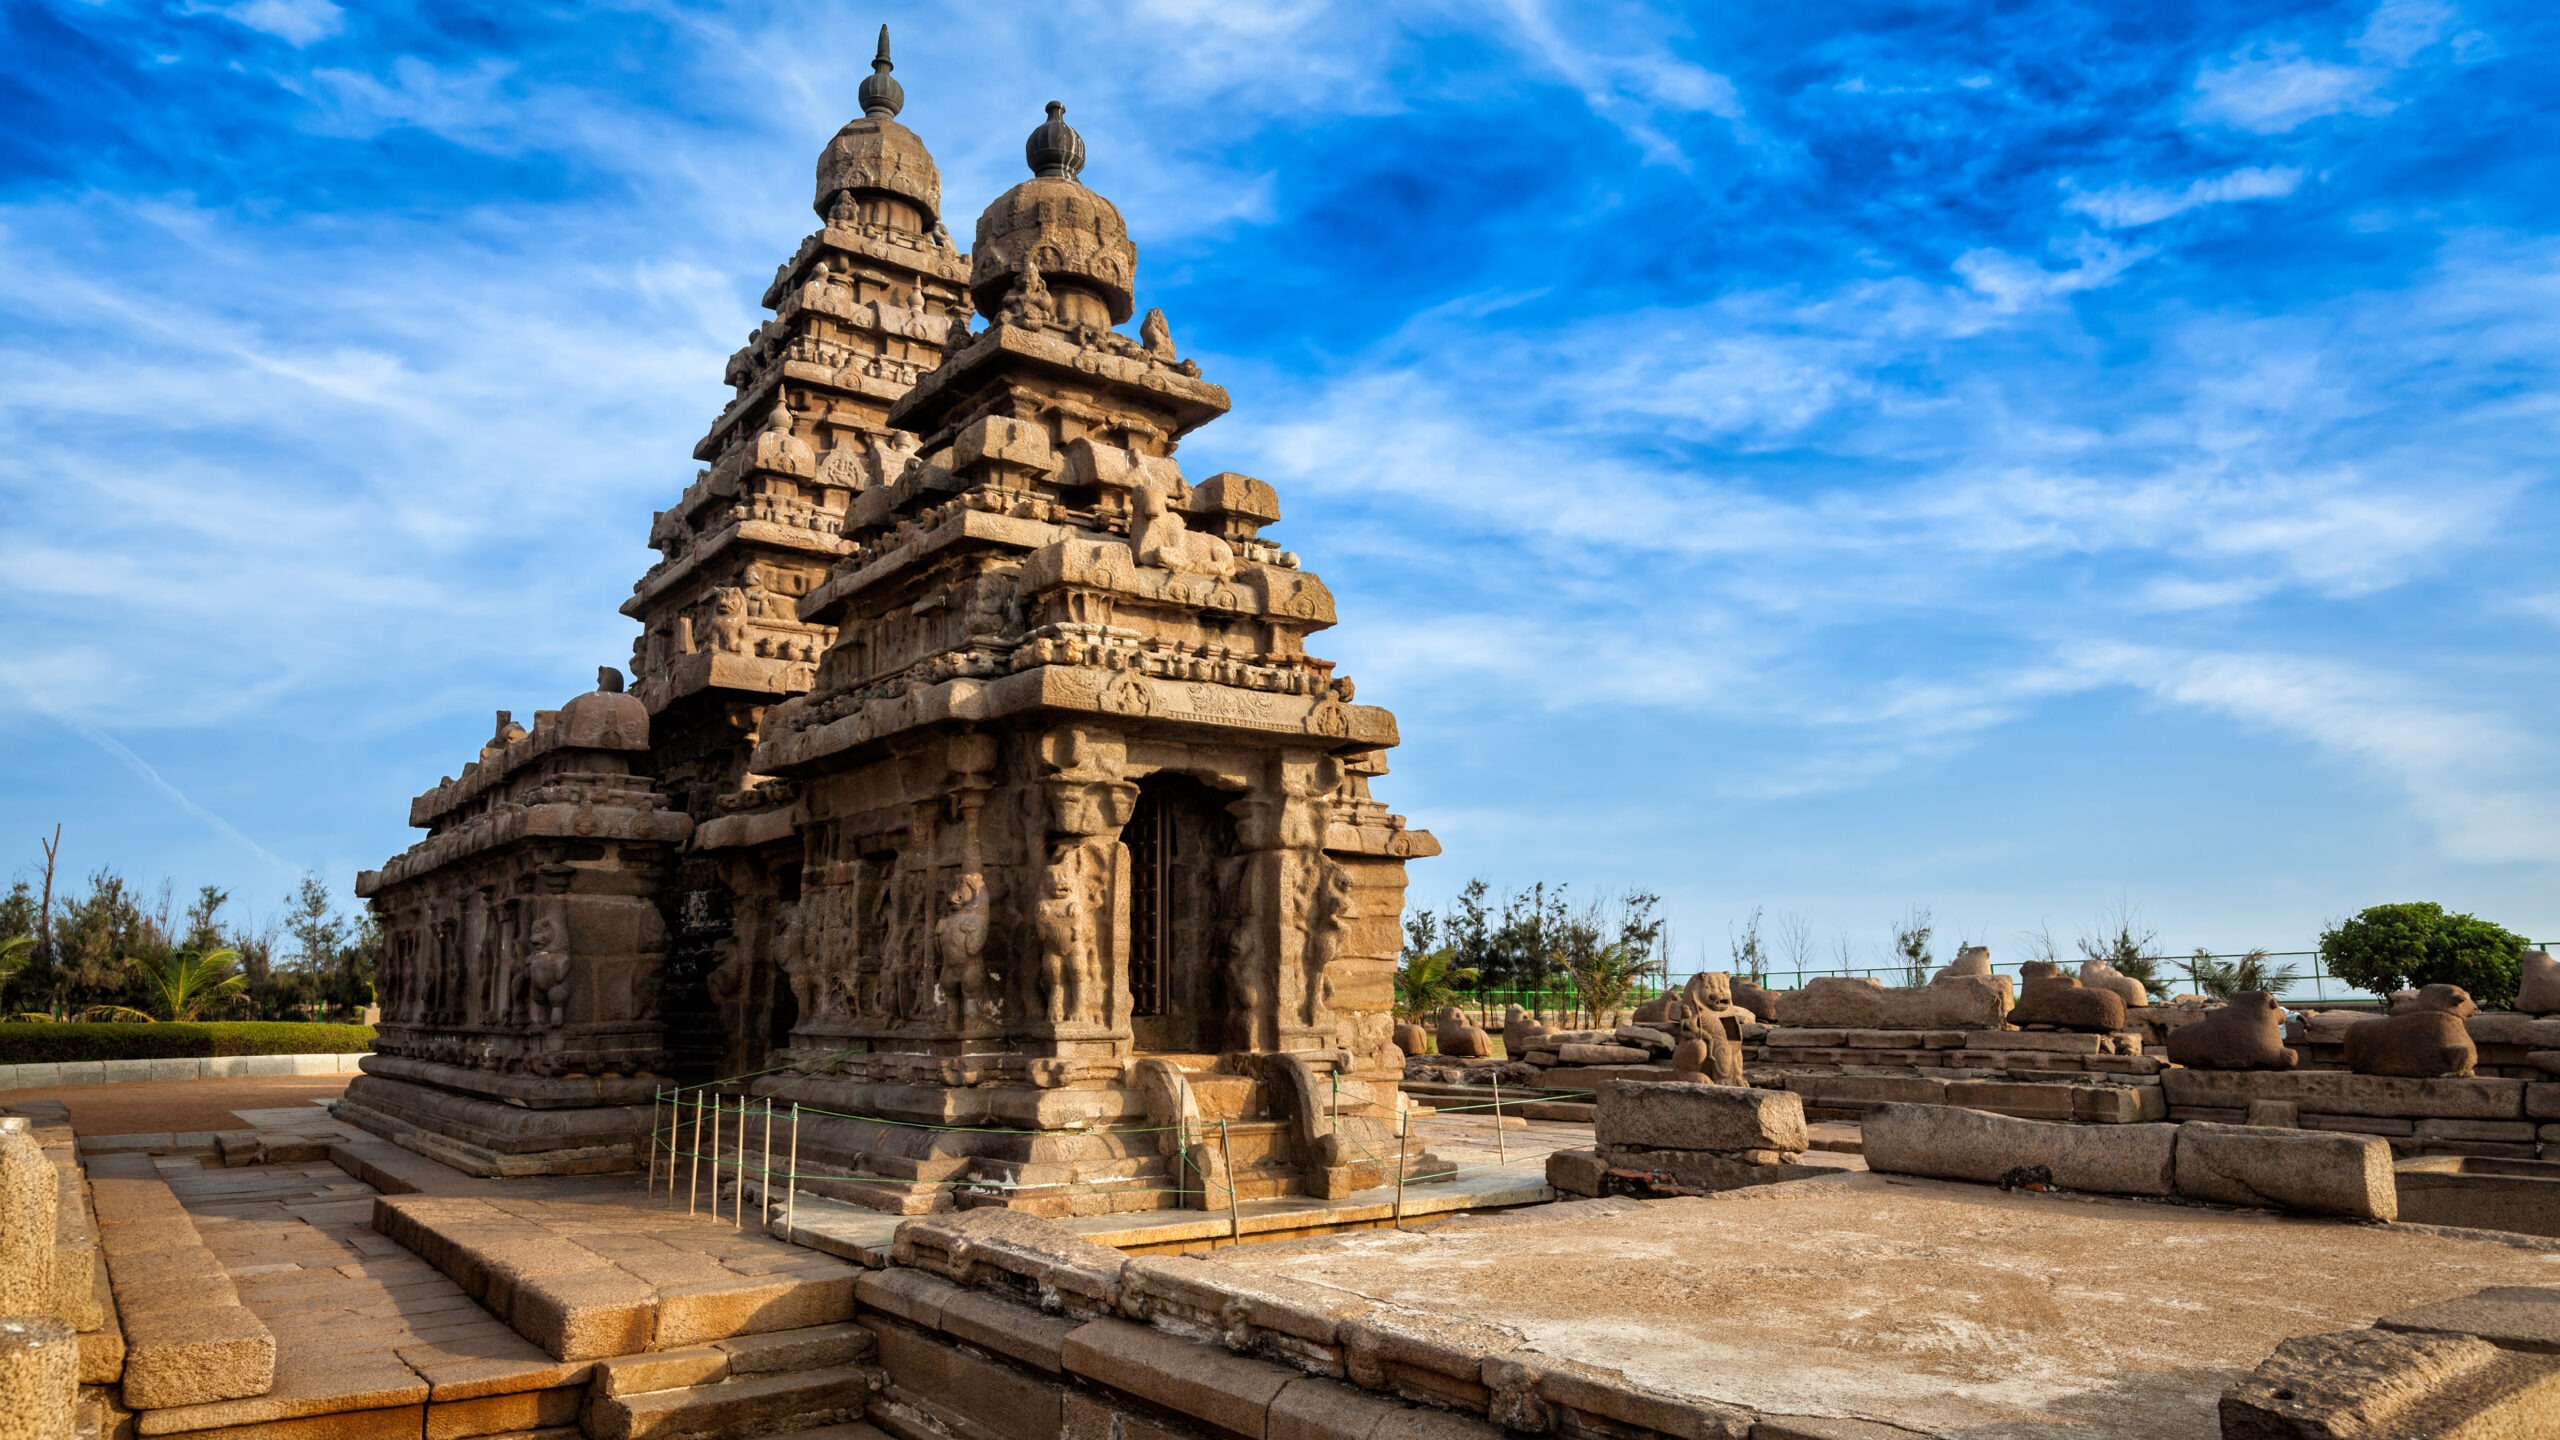 With its stunning architecture, historical monuments, and spiritual sites, India is a popular destination for tourists and history enthusiasts. In this article, we’ll explore some of the top destinations in India with historical significance that will leave you amazed.